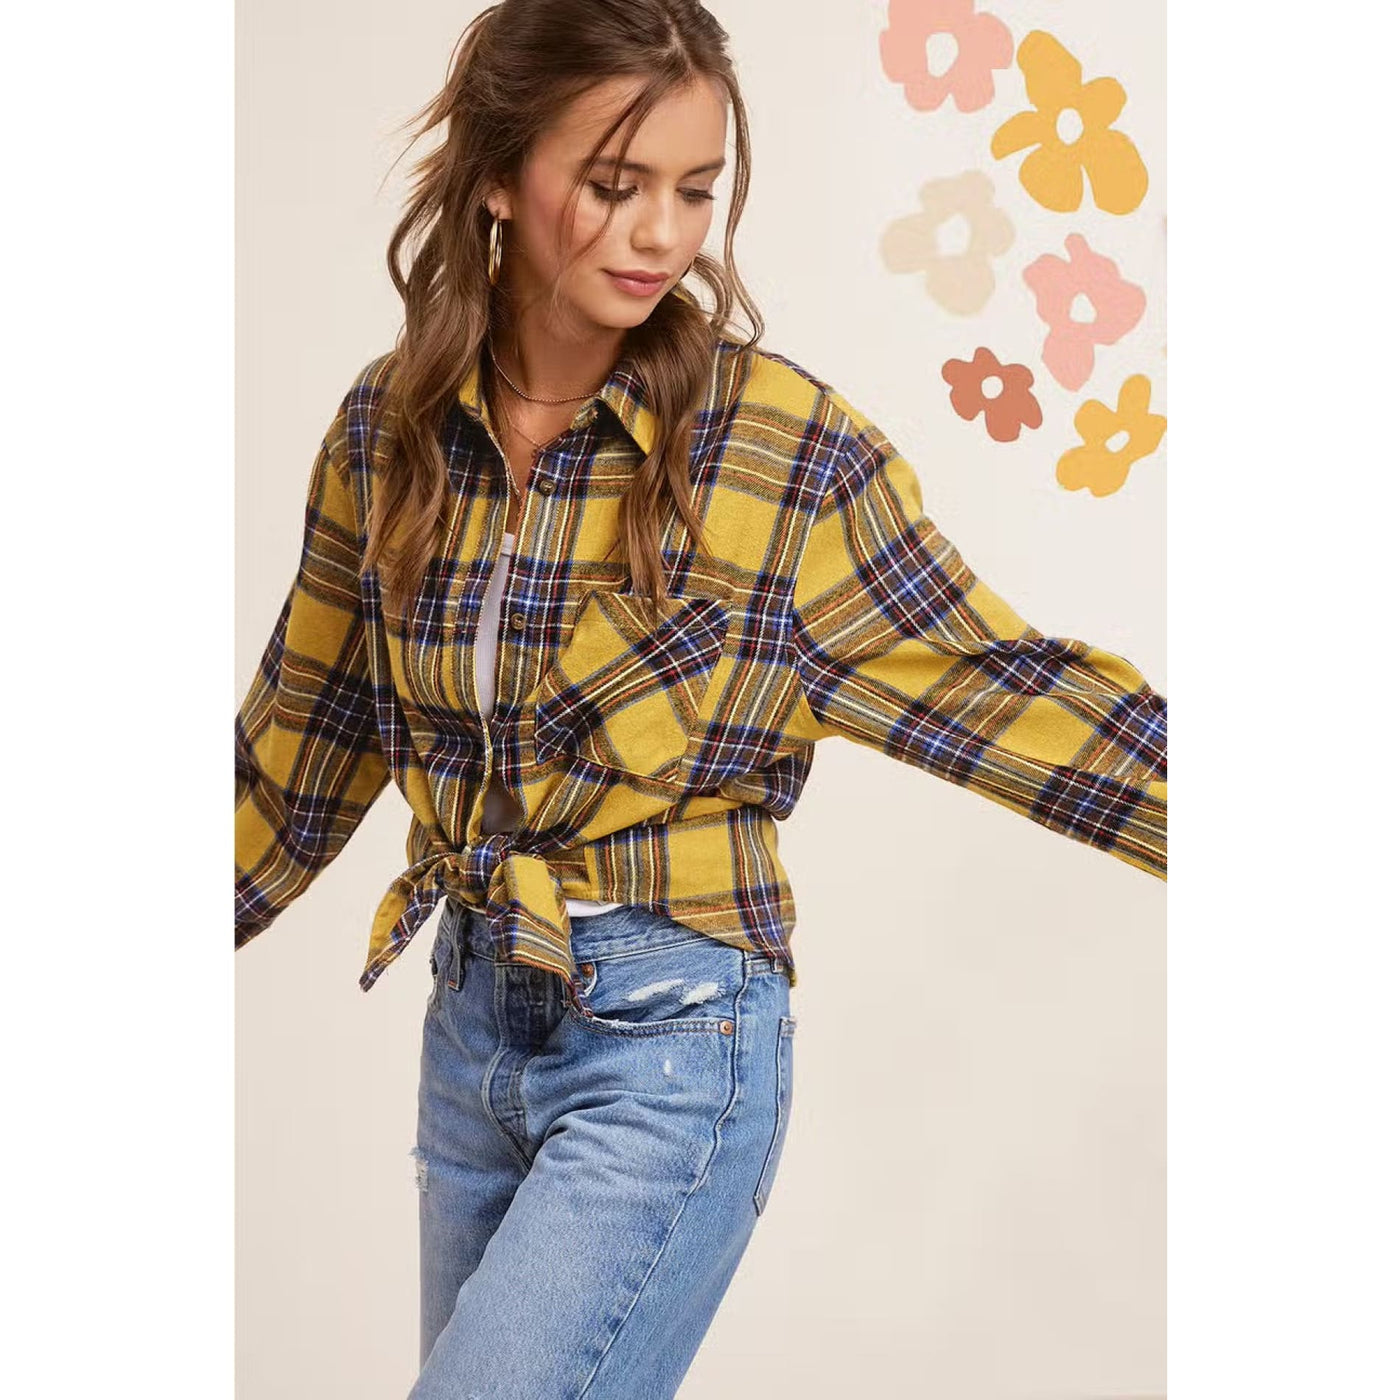 Stay Here Forever Plaid Flannel Top - 120 Long Sleeve Tops